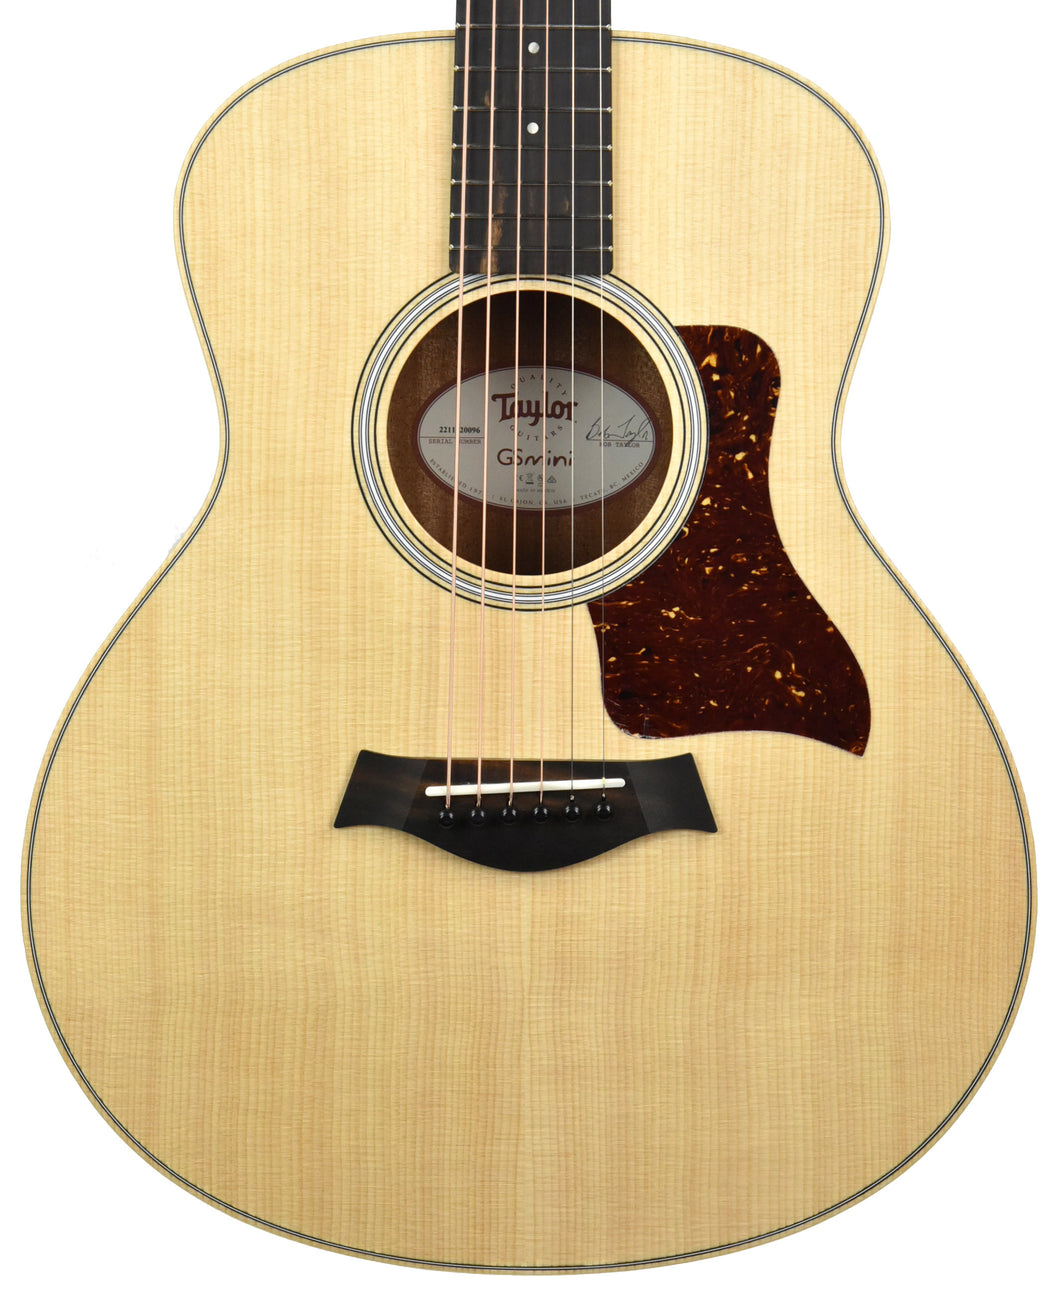 Taylor GS Mini Rosewood Acoustic Guitar in Natural 2211120096 - The Music Gallery